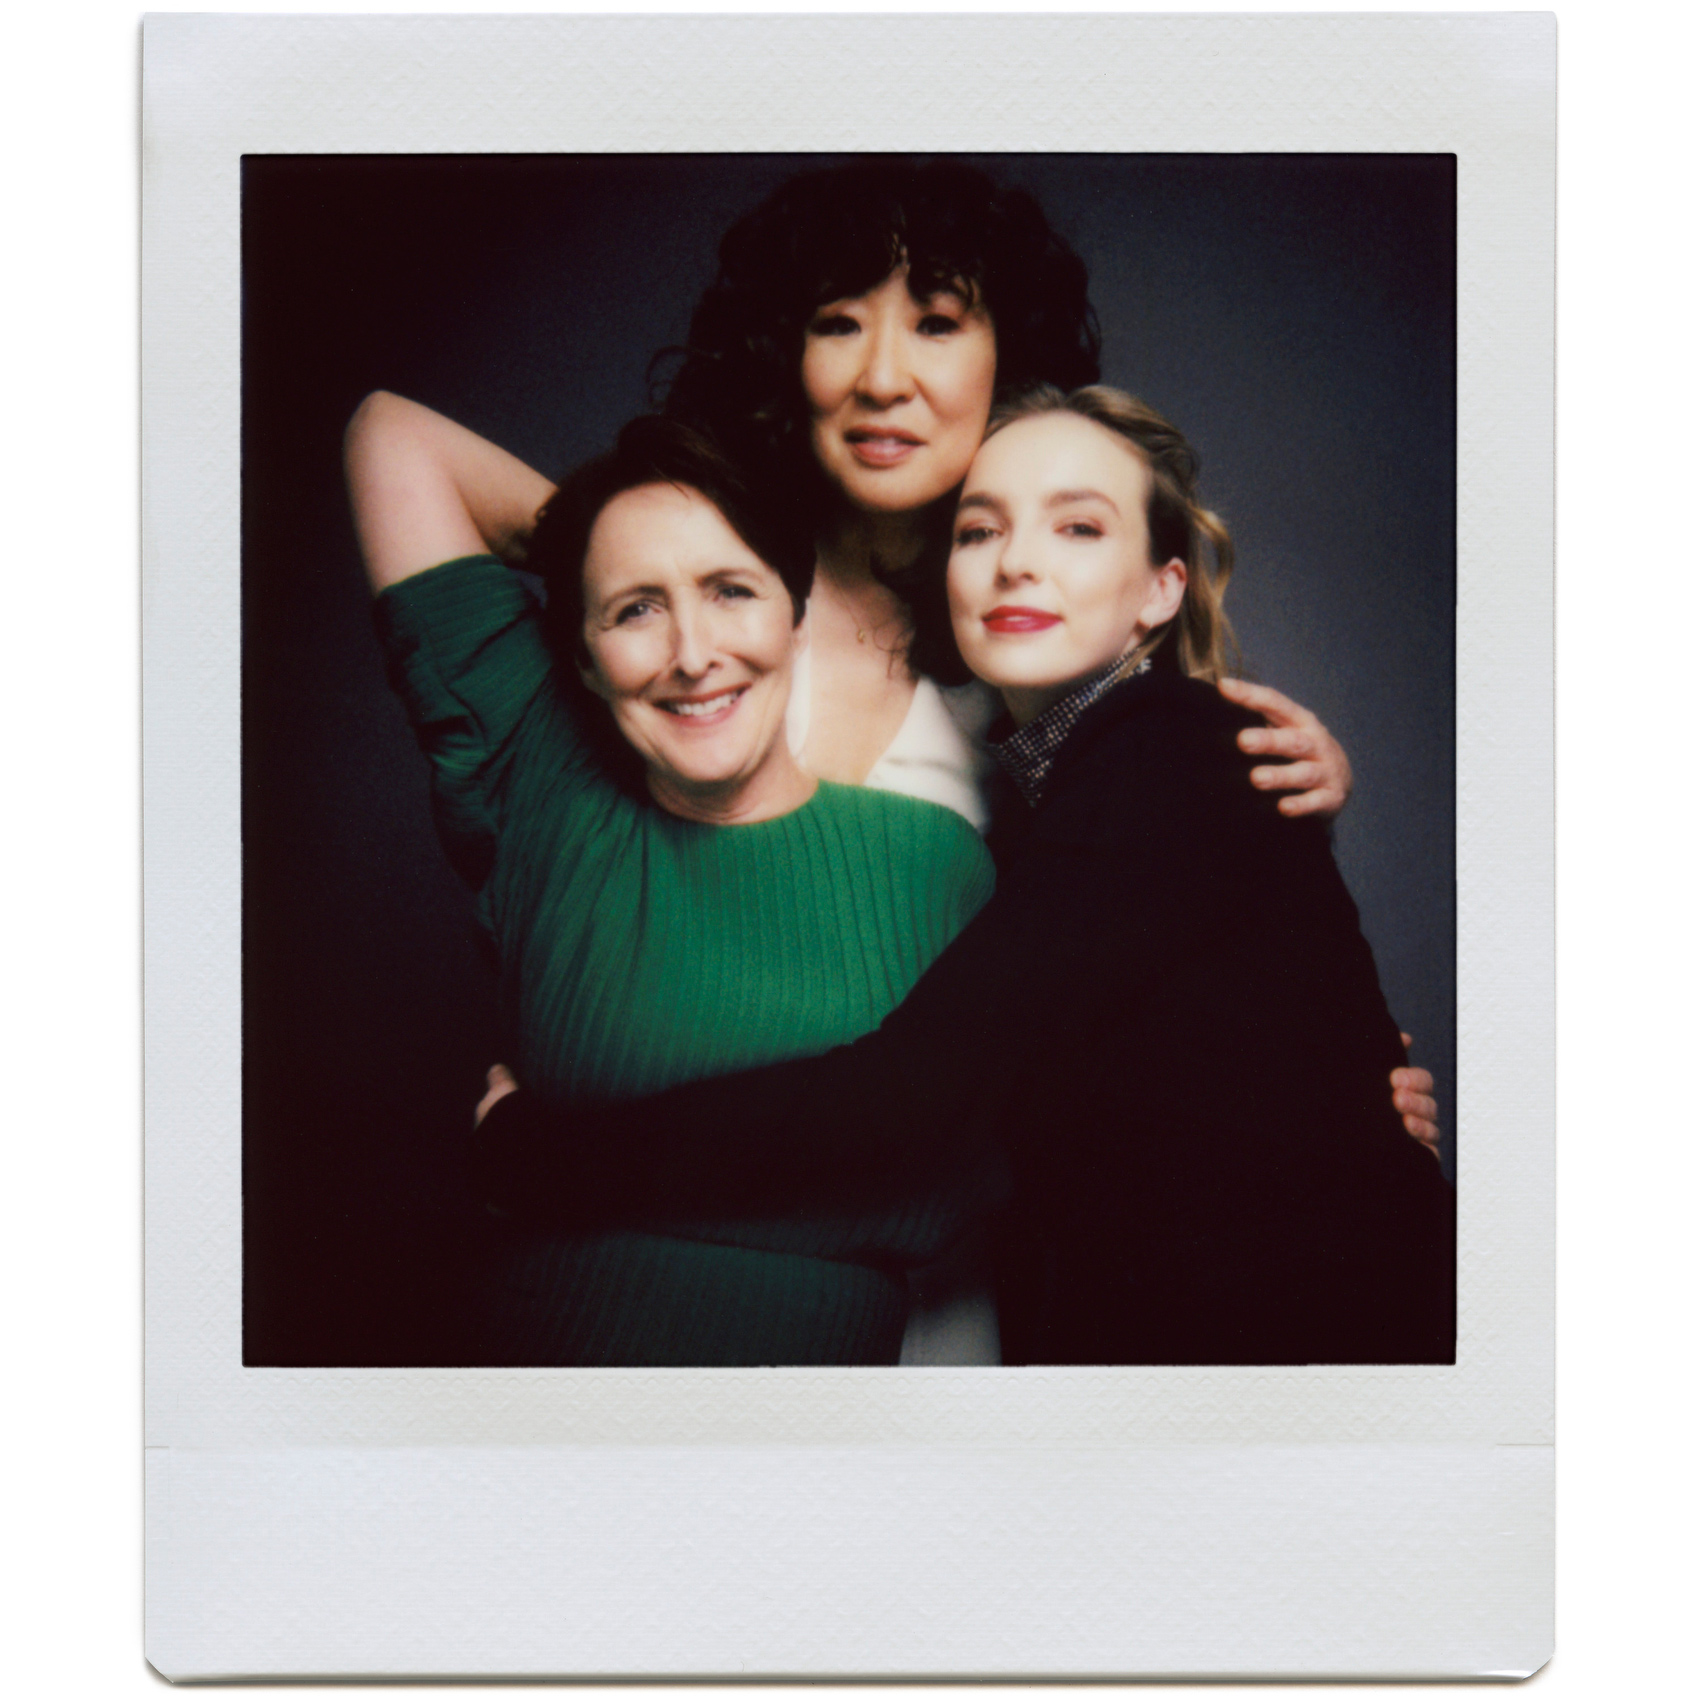 Fiona Shaw, Sandra Oh and Jodie Comer